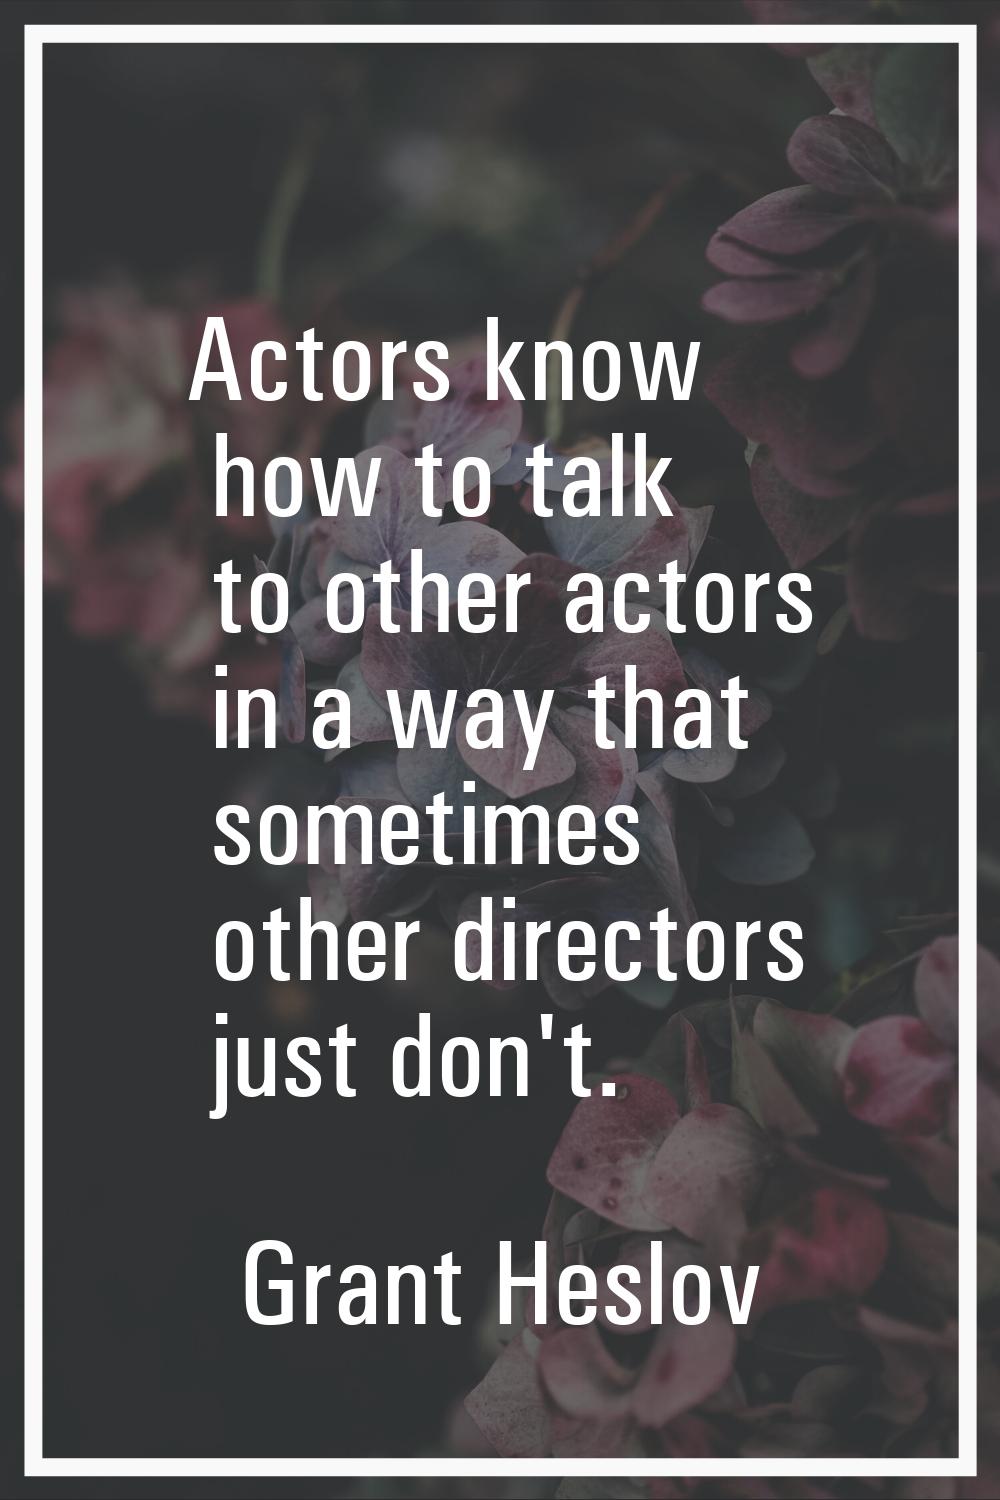 Actors know how to talk to other actors in a way that sometimes other directors just don't.